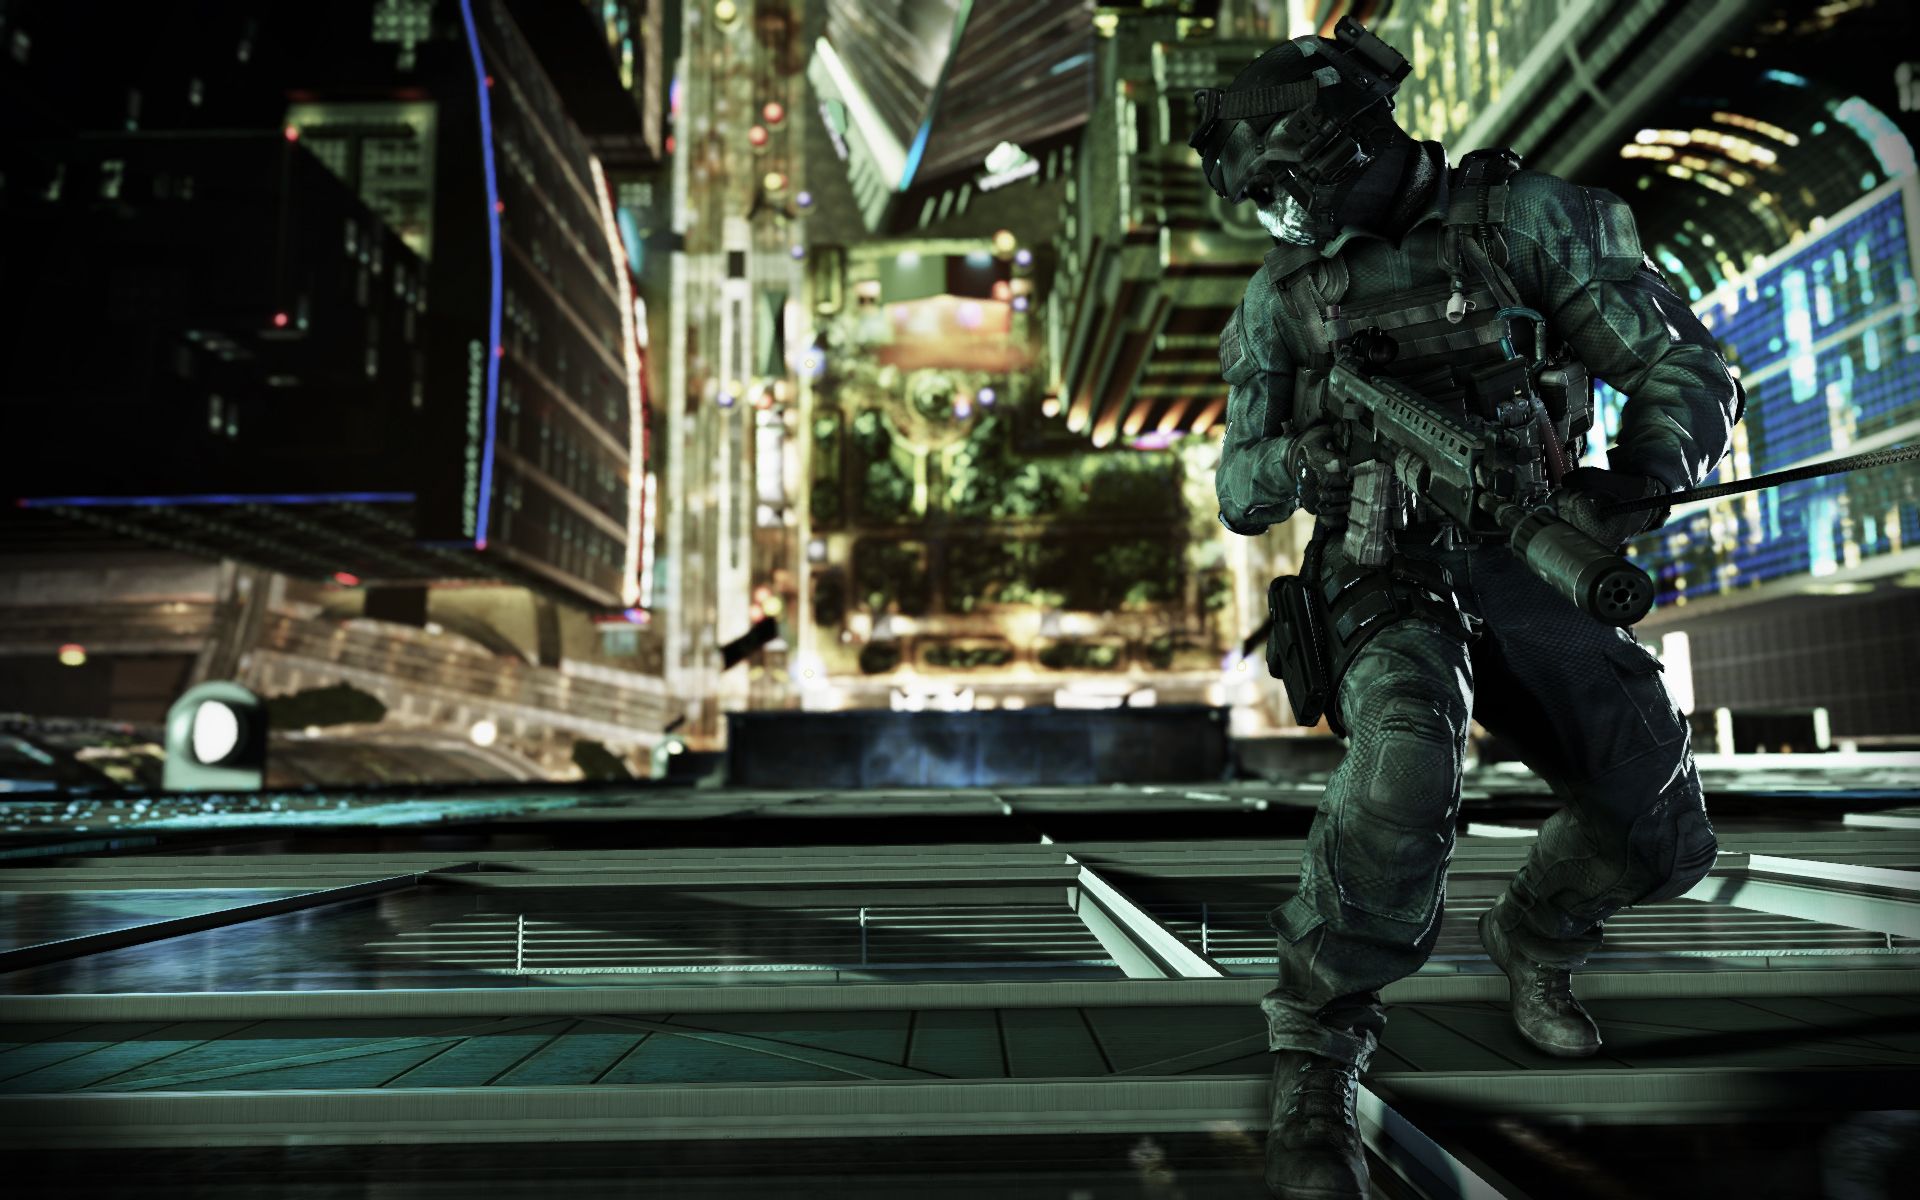 Is Call of Duty: Ghosts Worth Buying on PS3? Review